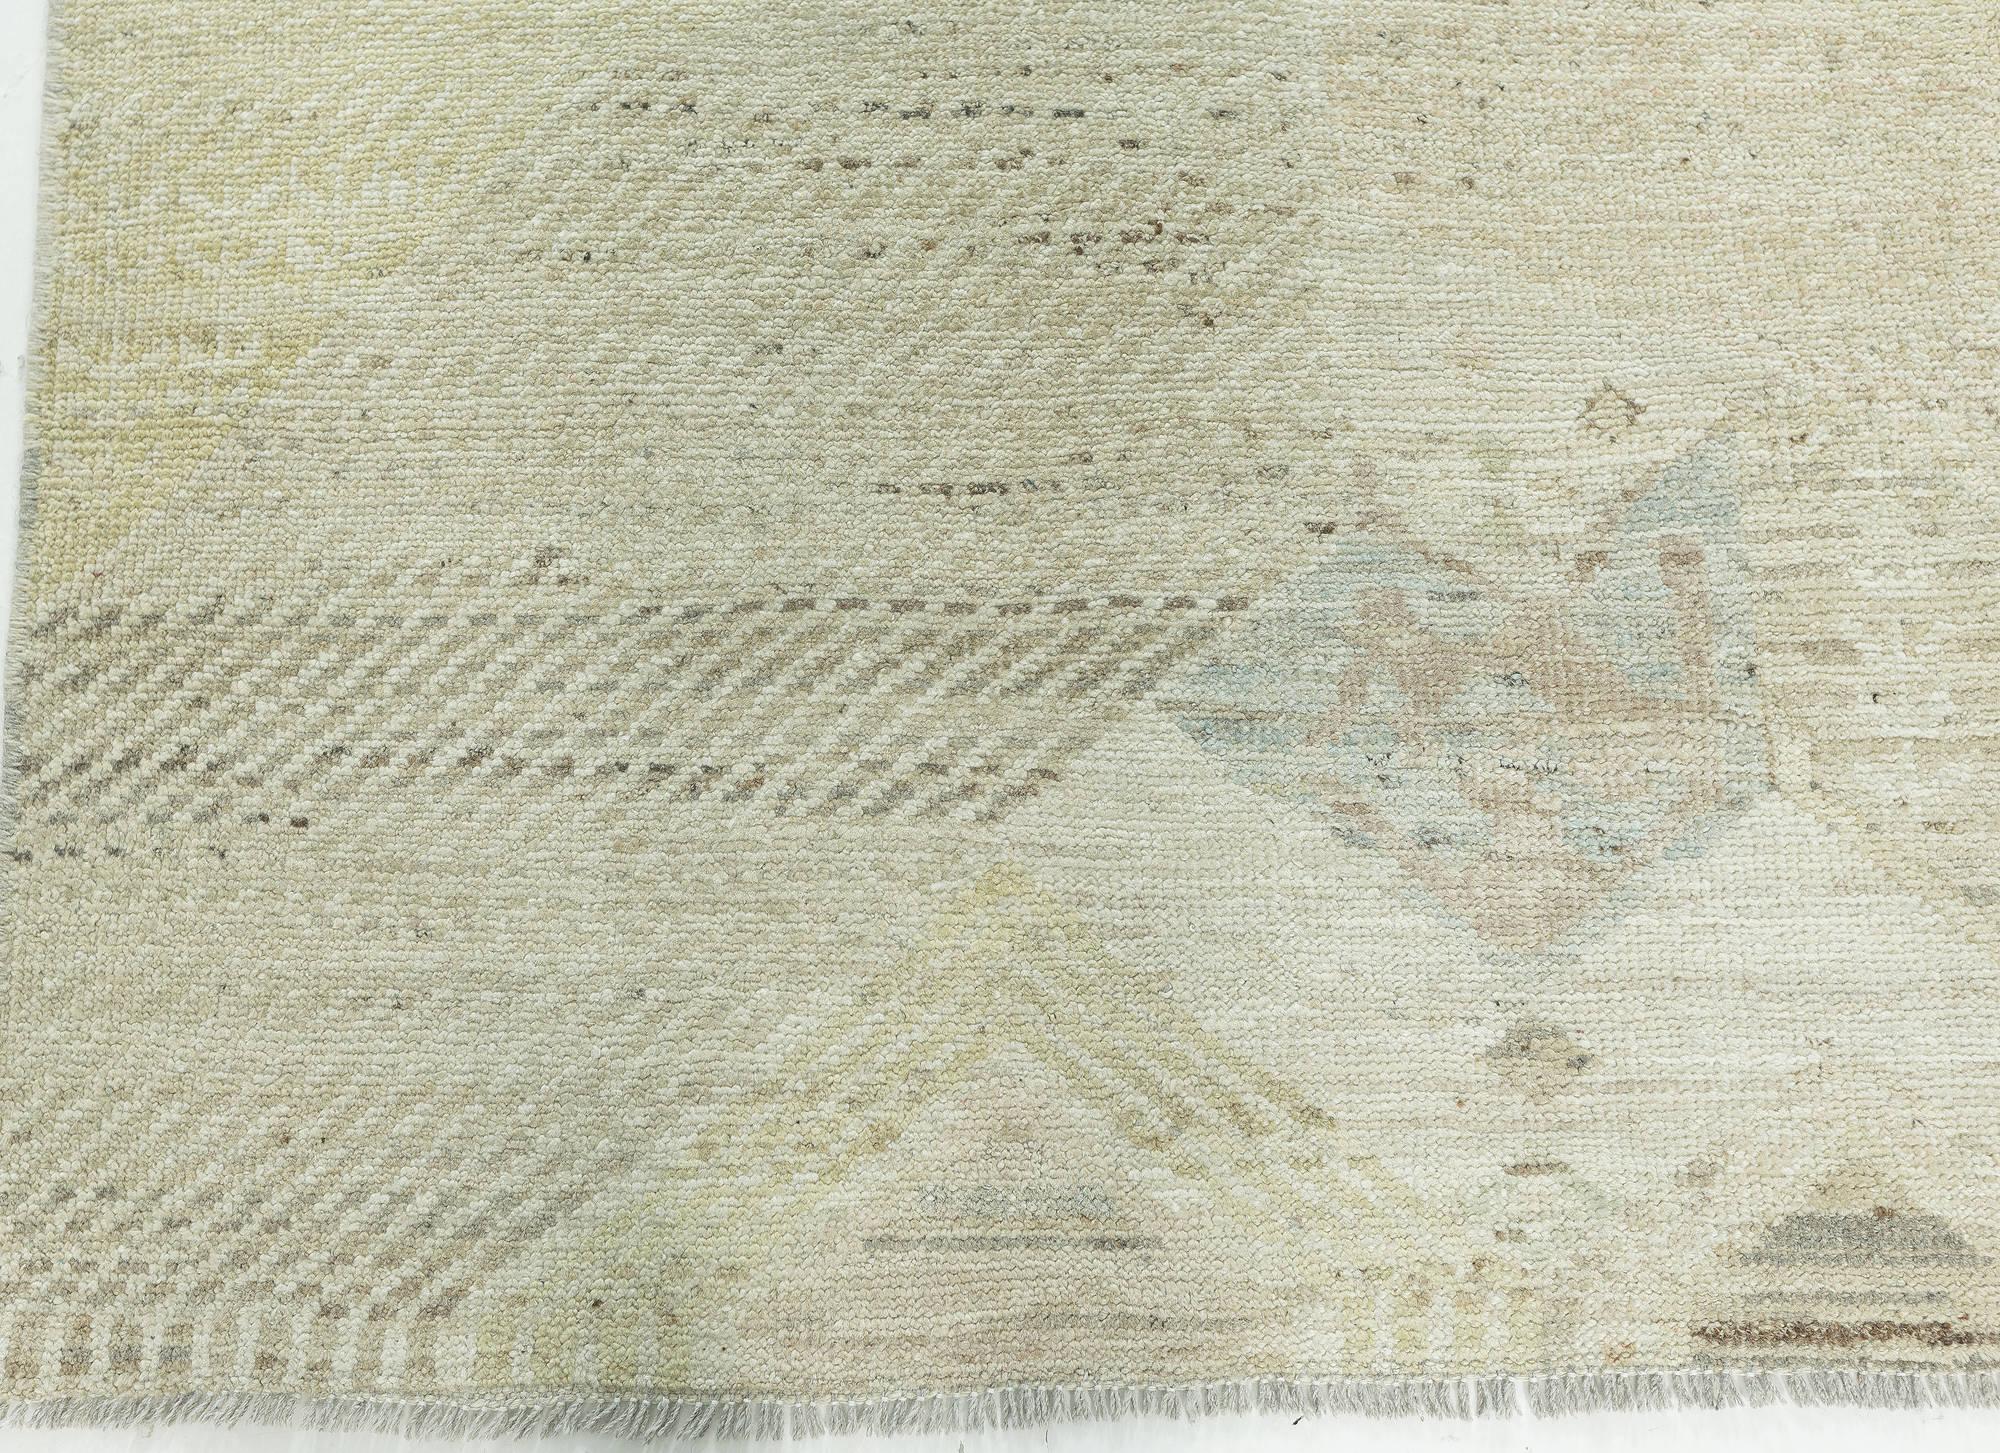 Hand-Knotted Countryside Textural Light Blue, Beige Handmade Wool Rug by Doris Leslie Blau For Sale